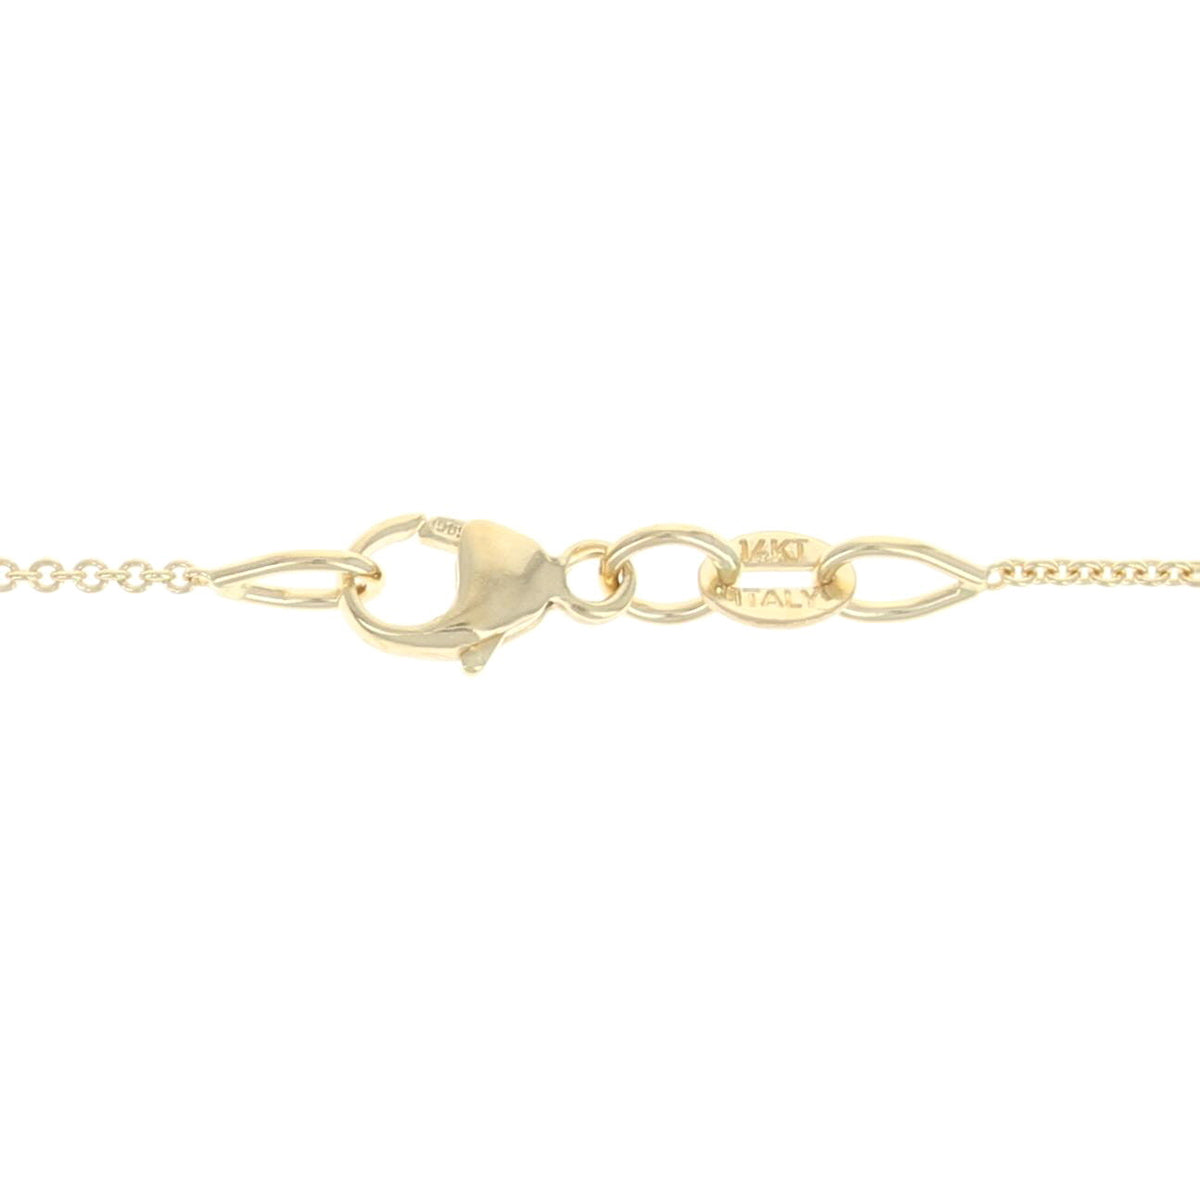 Cable Chain Necklace Yellow Gold